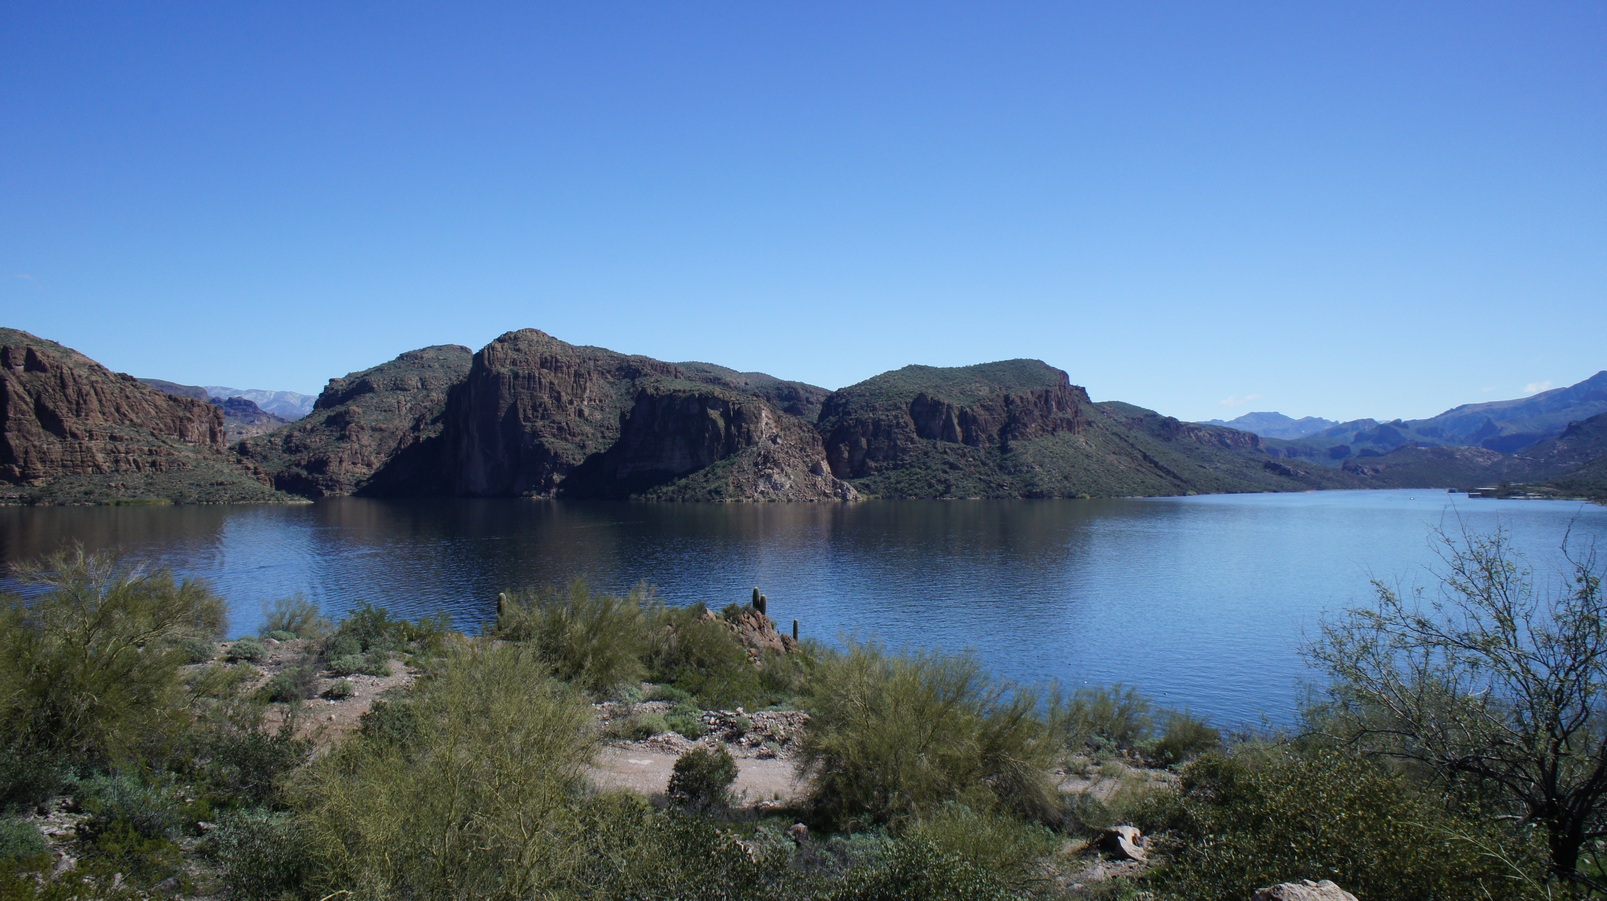 canyon lake in arizona's superstition wilderness